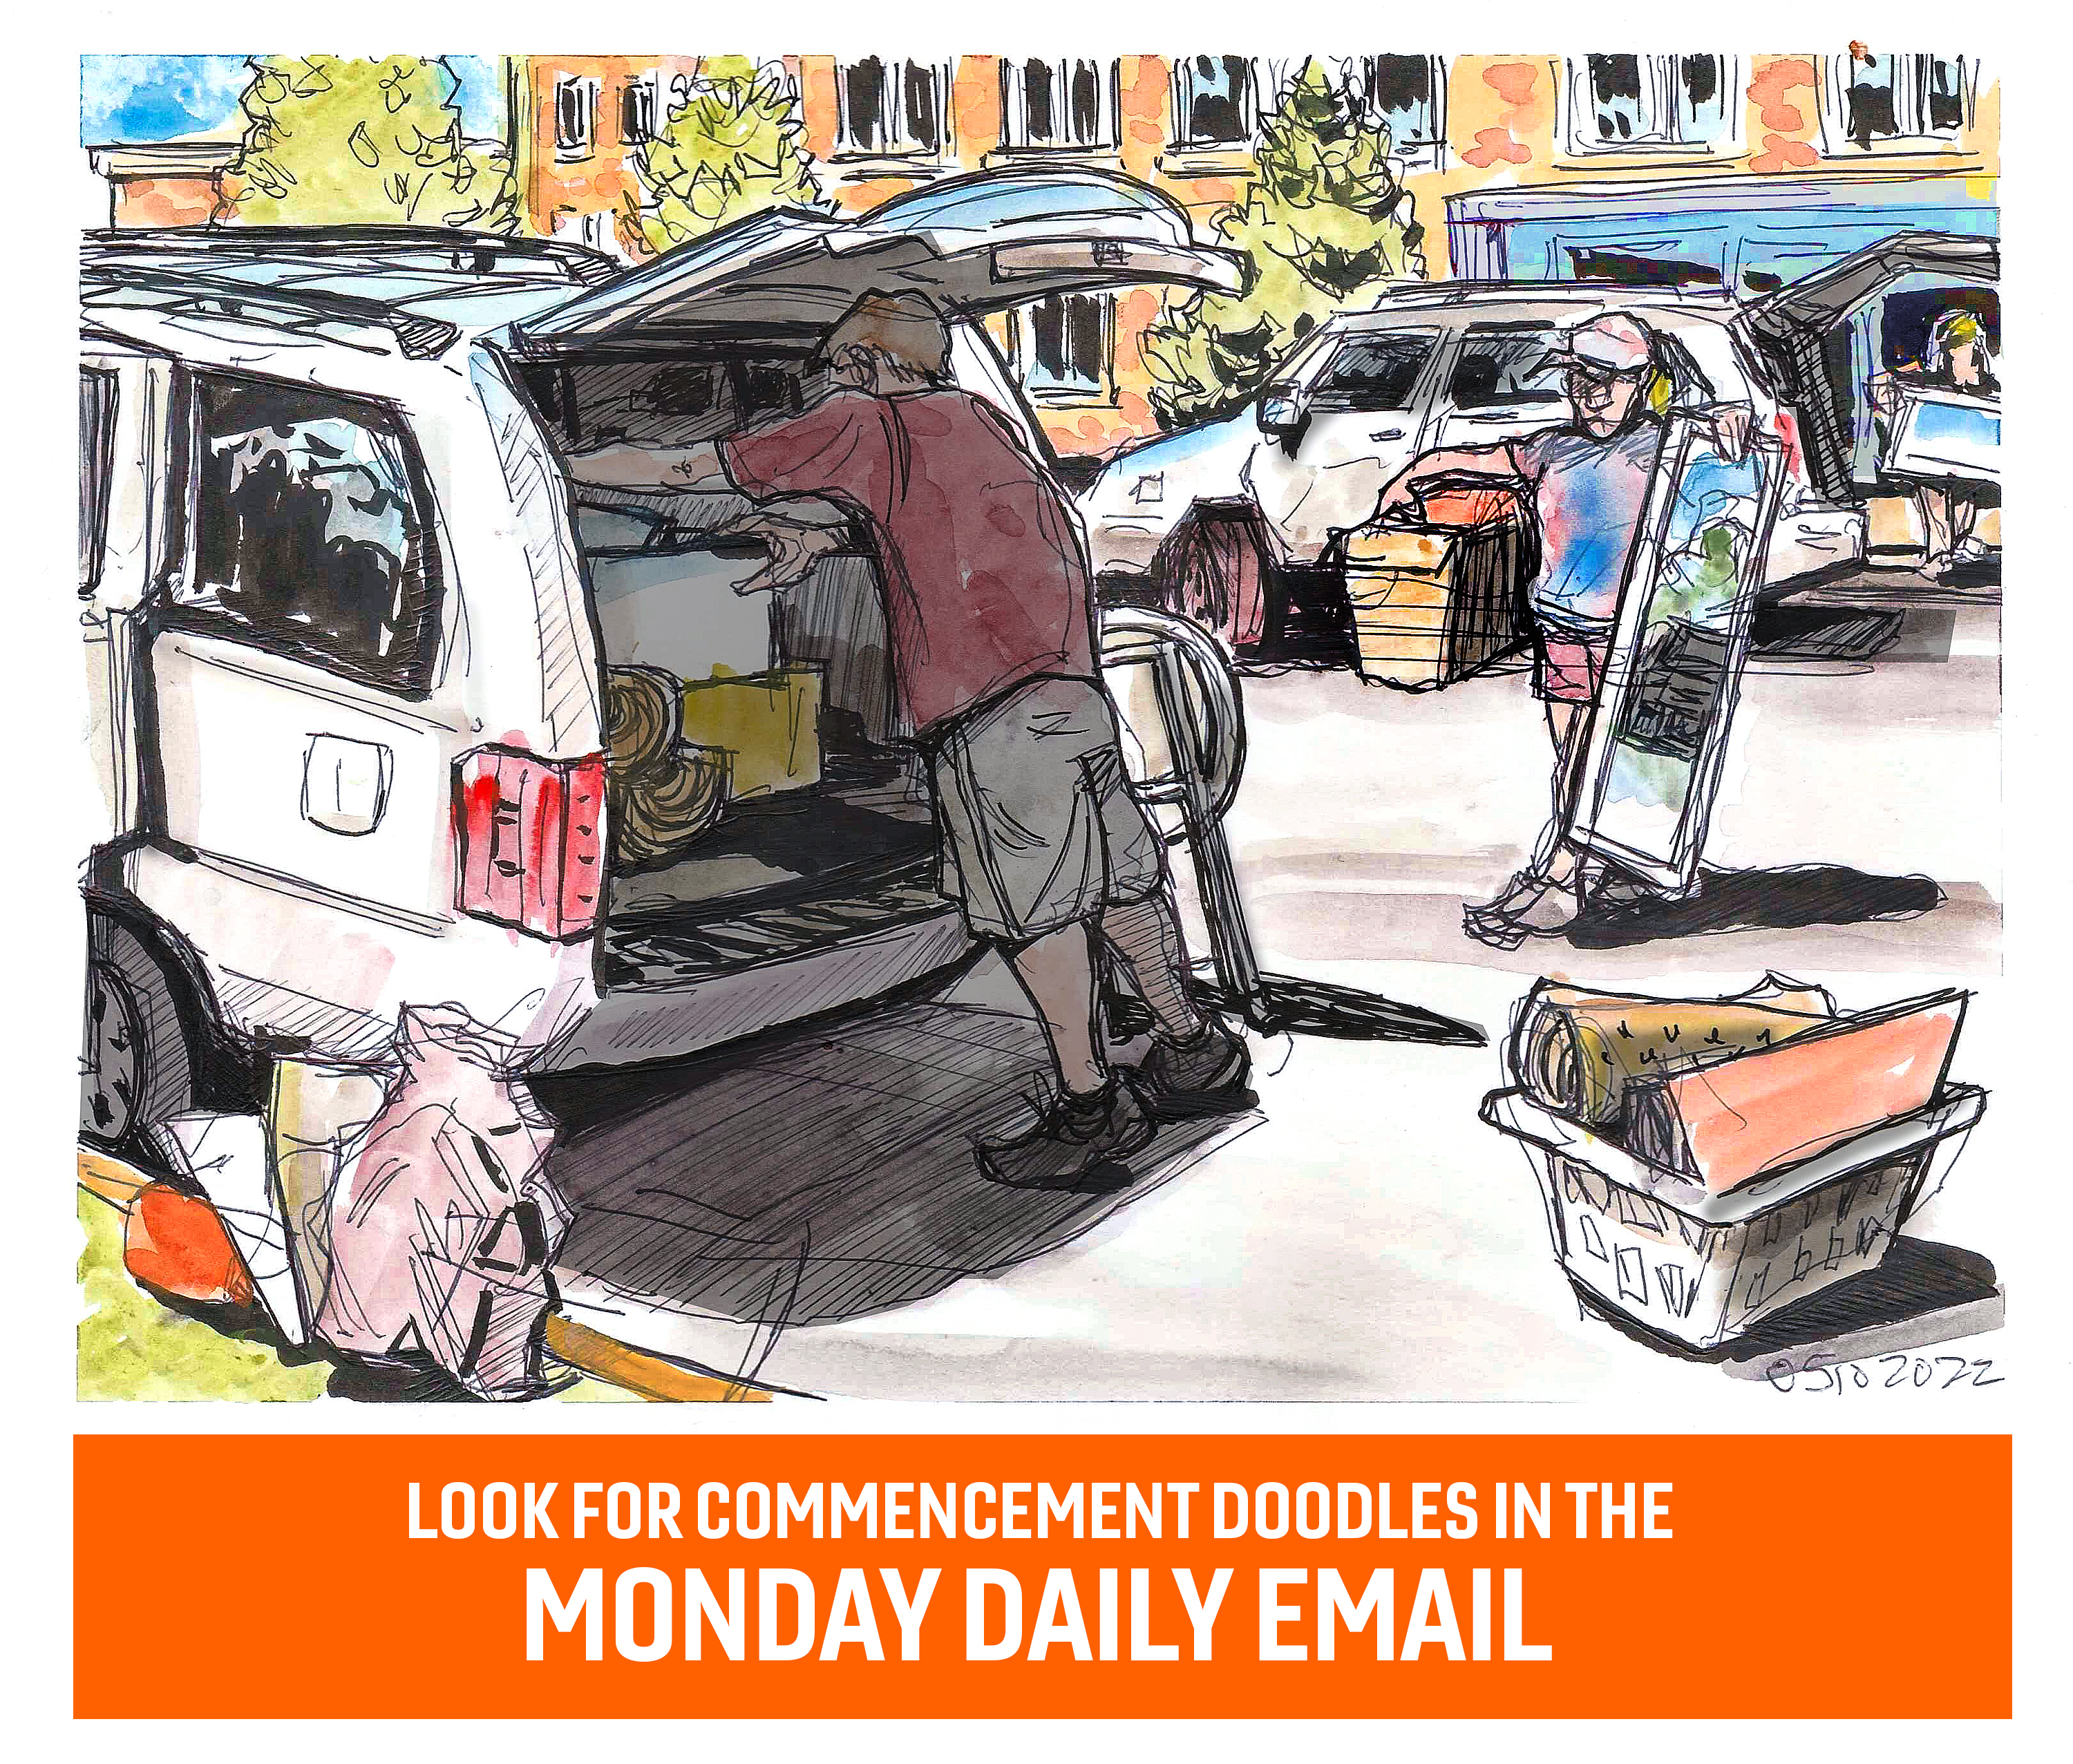 ink and watercolor sketch of a parent packing a van while another person brings a mirror from inside the GLC. 